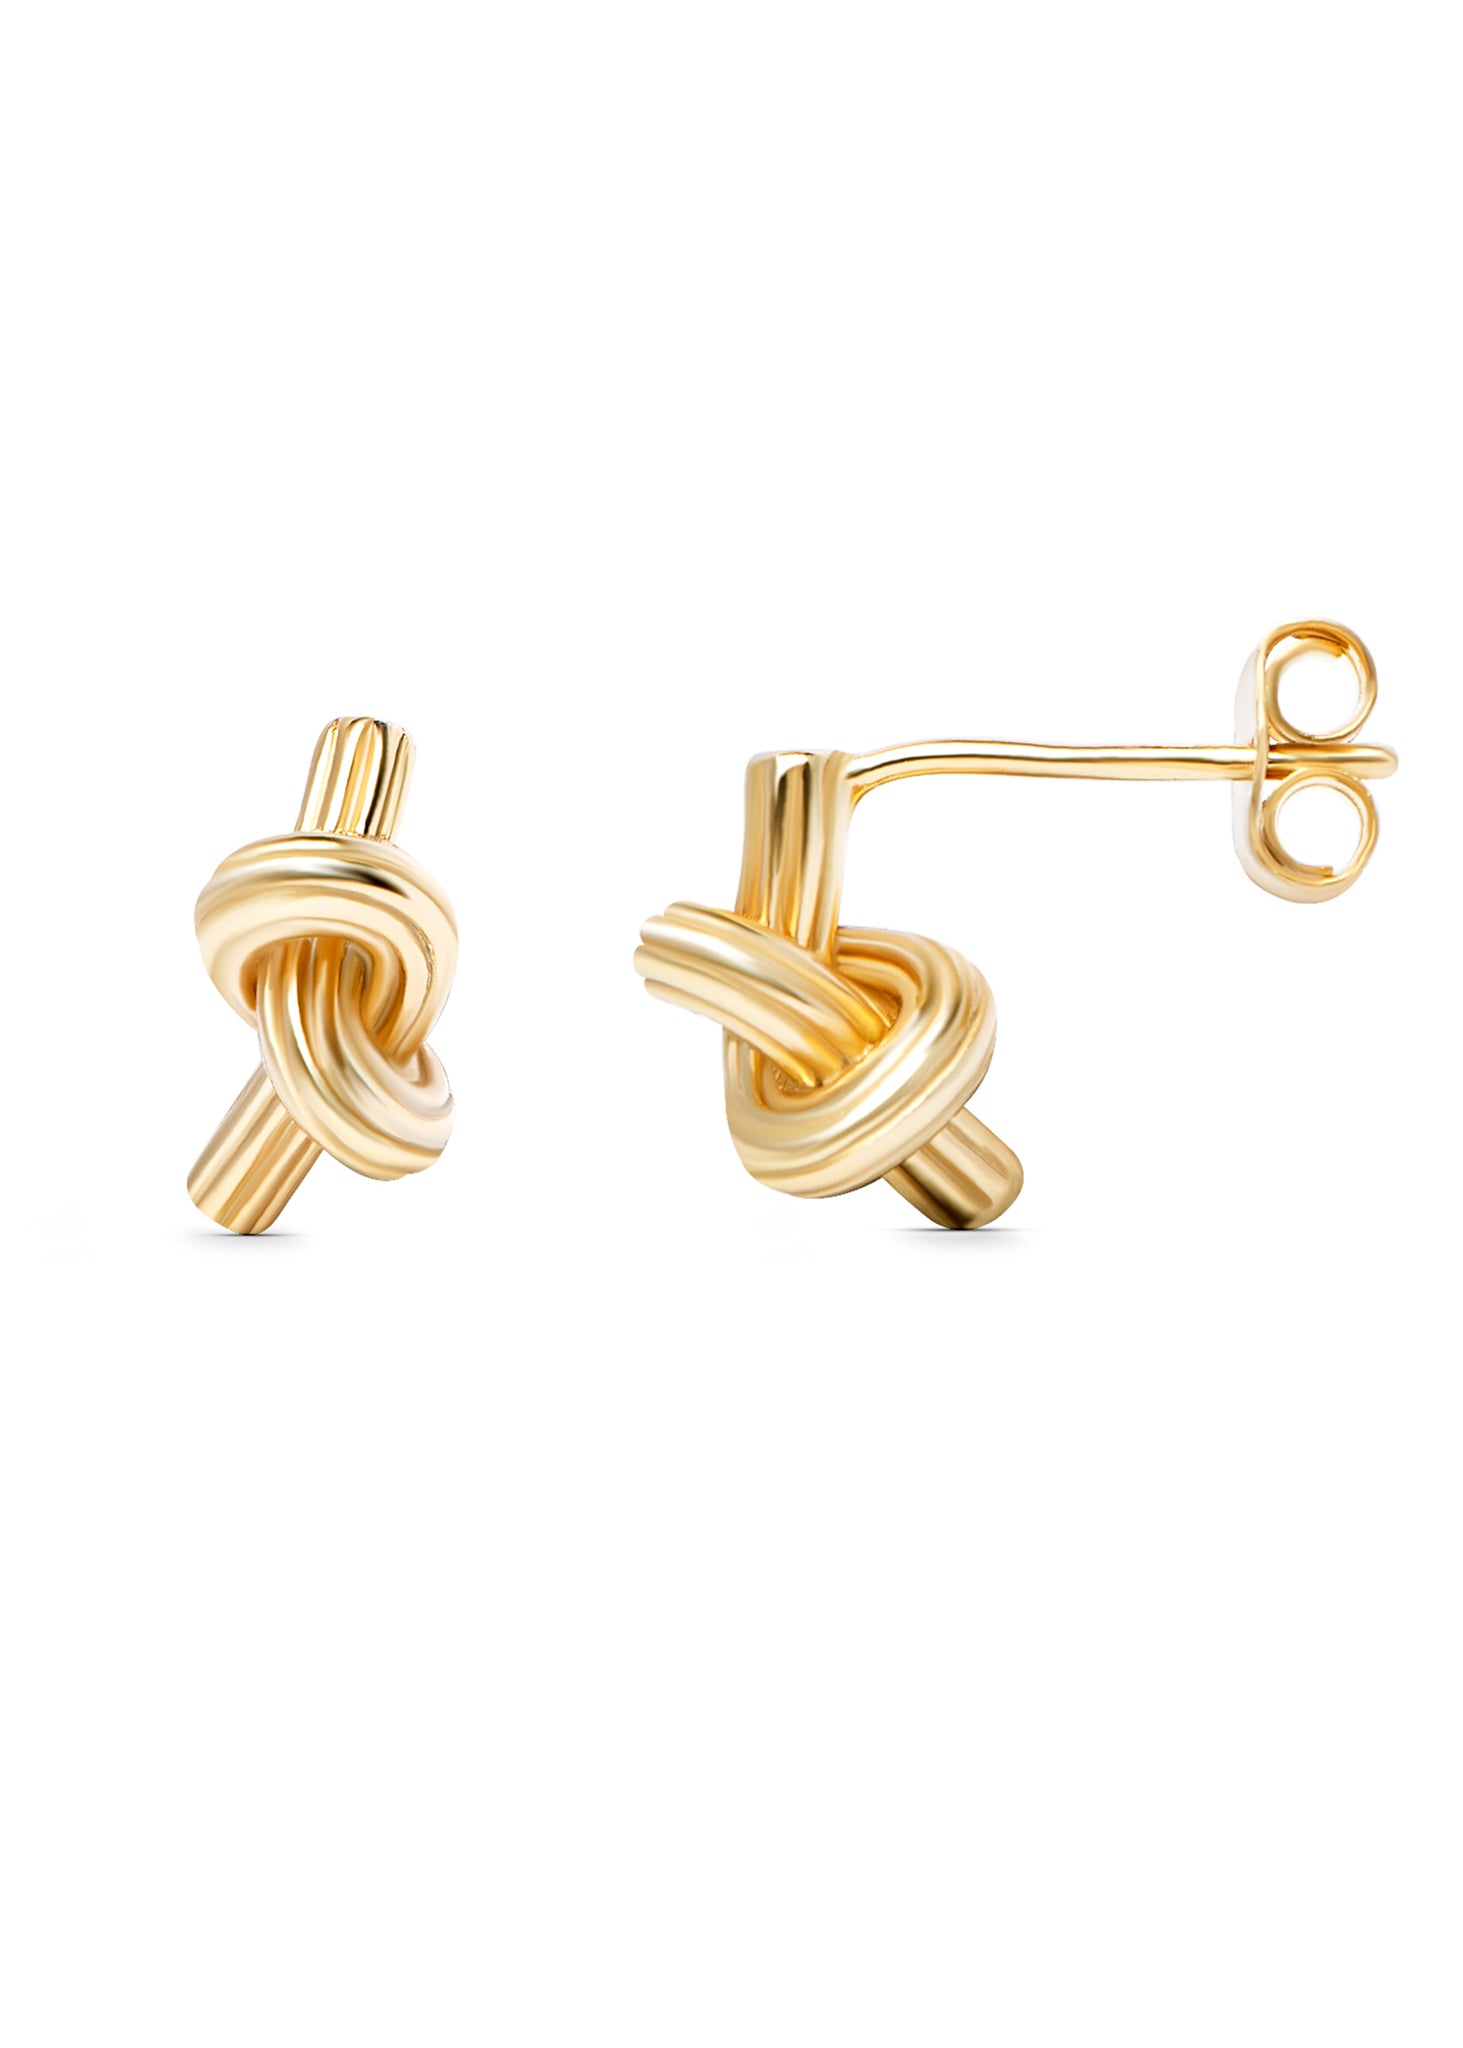 Gold knot studs